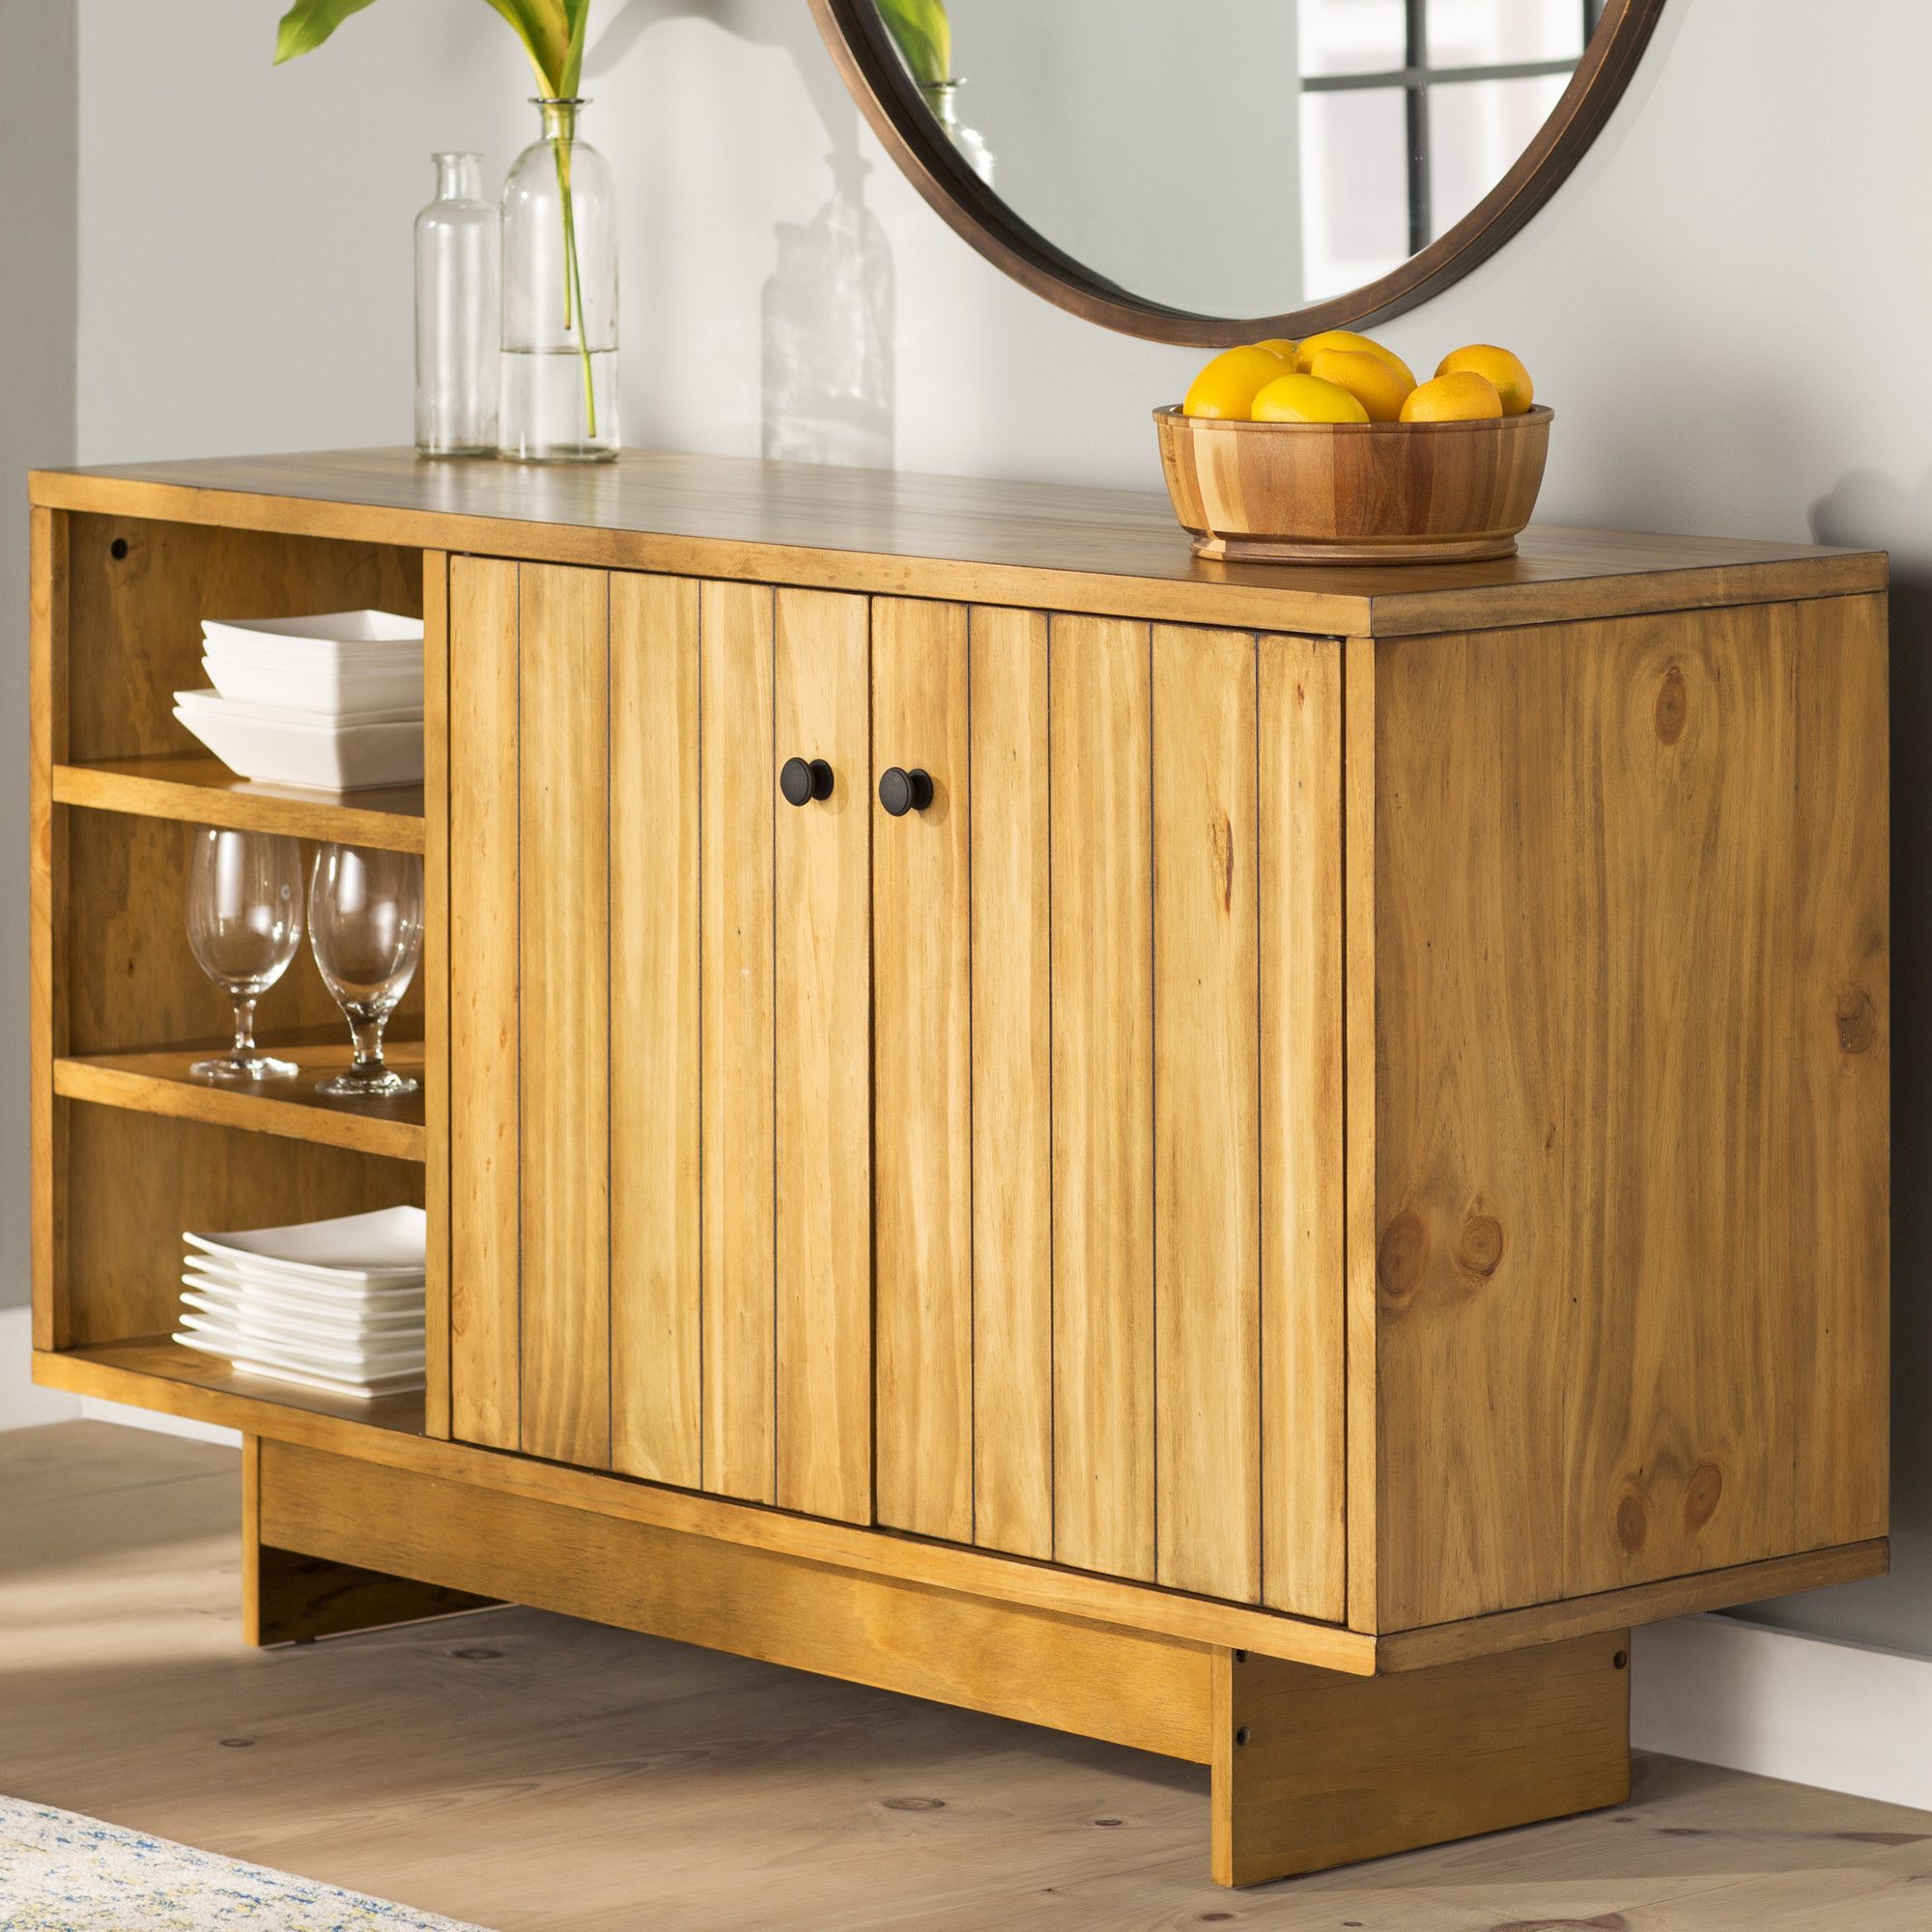 Avenal Sideboard | Products Throughout Avenal Sideboards (View 2 of 20)